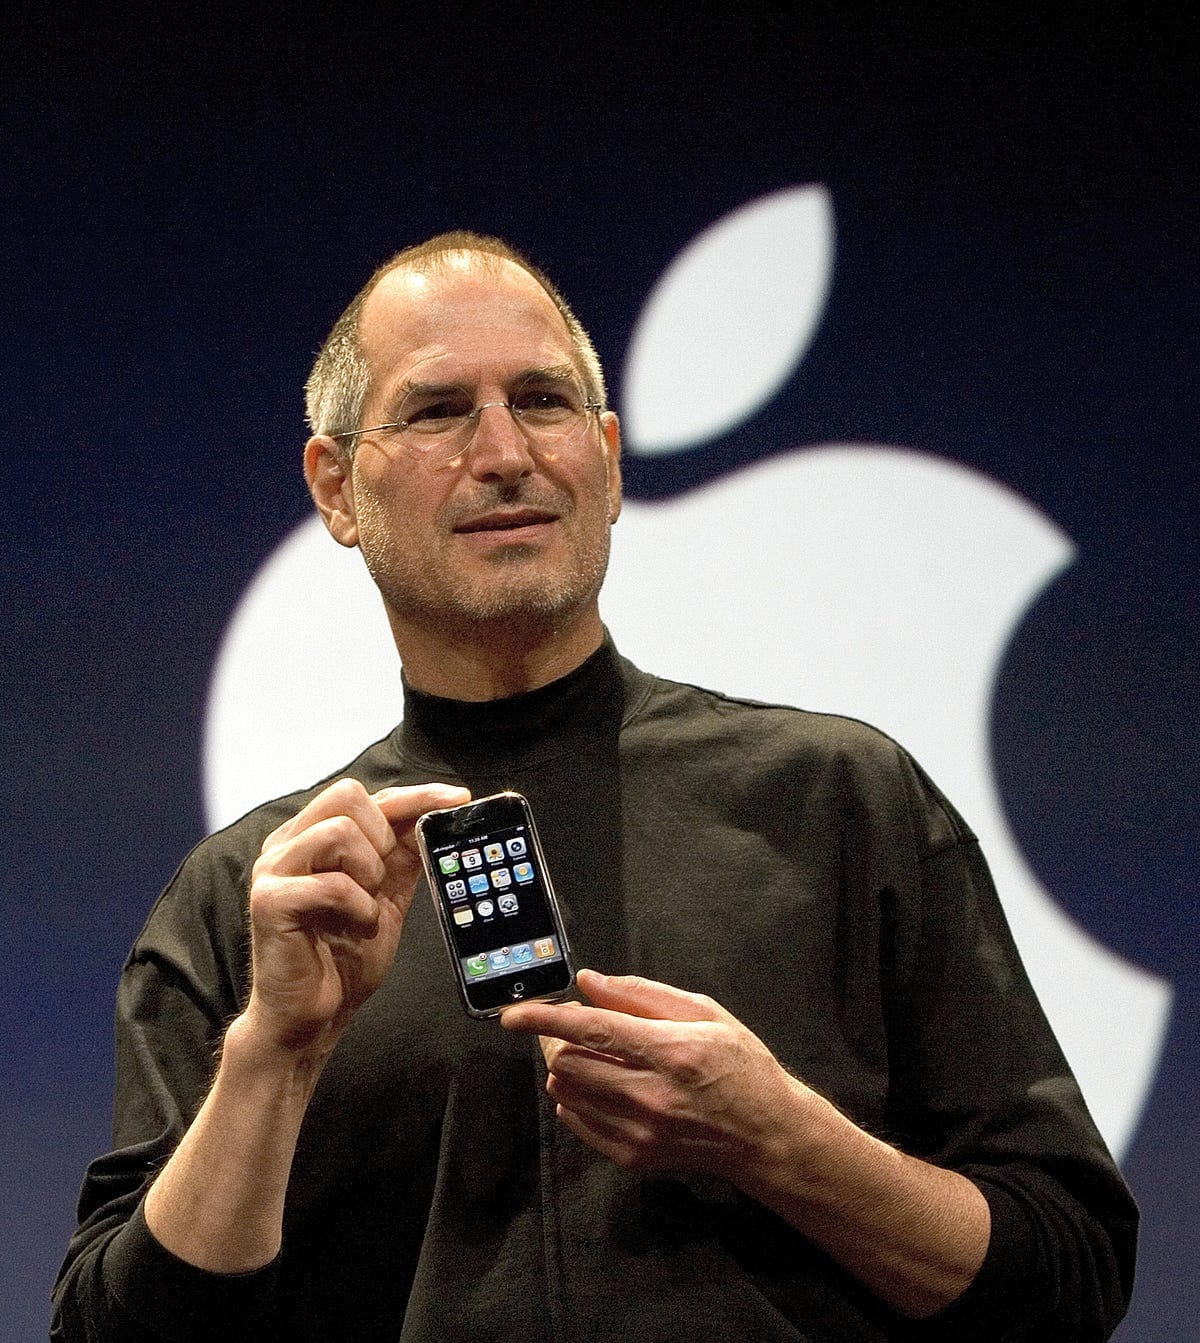 The original iPhone is now 10 years old